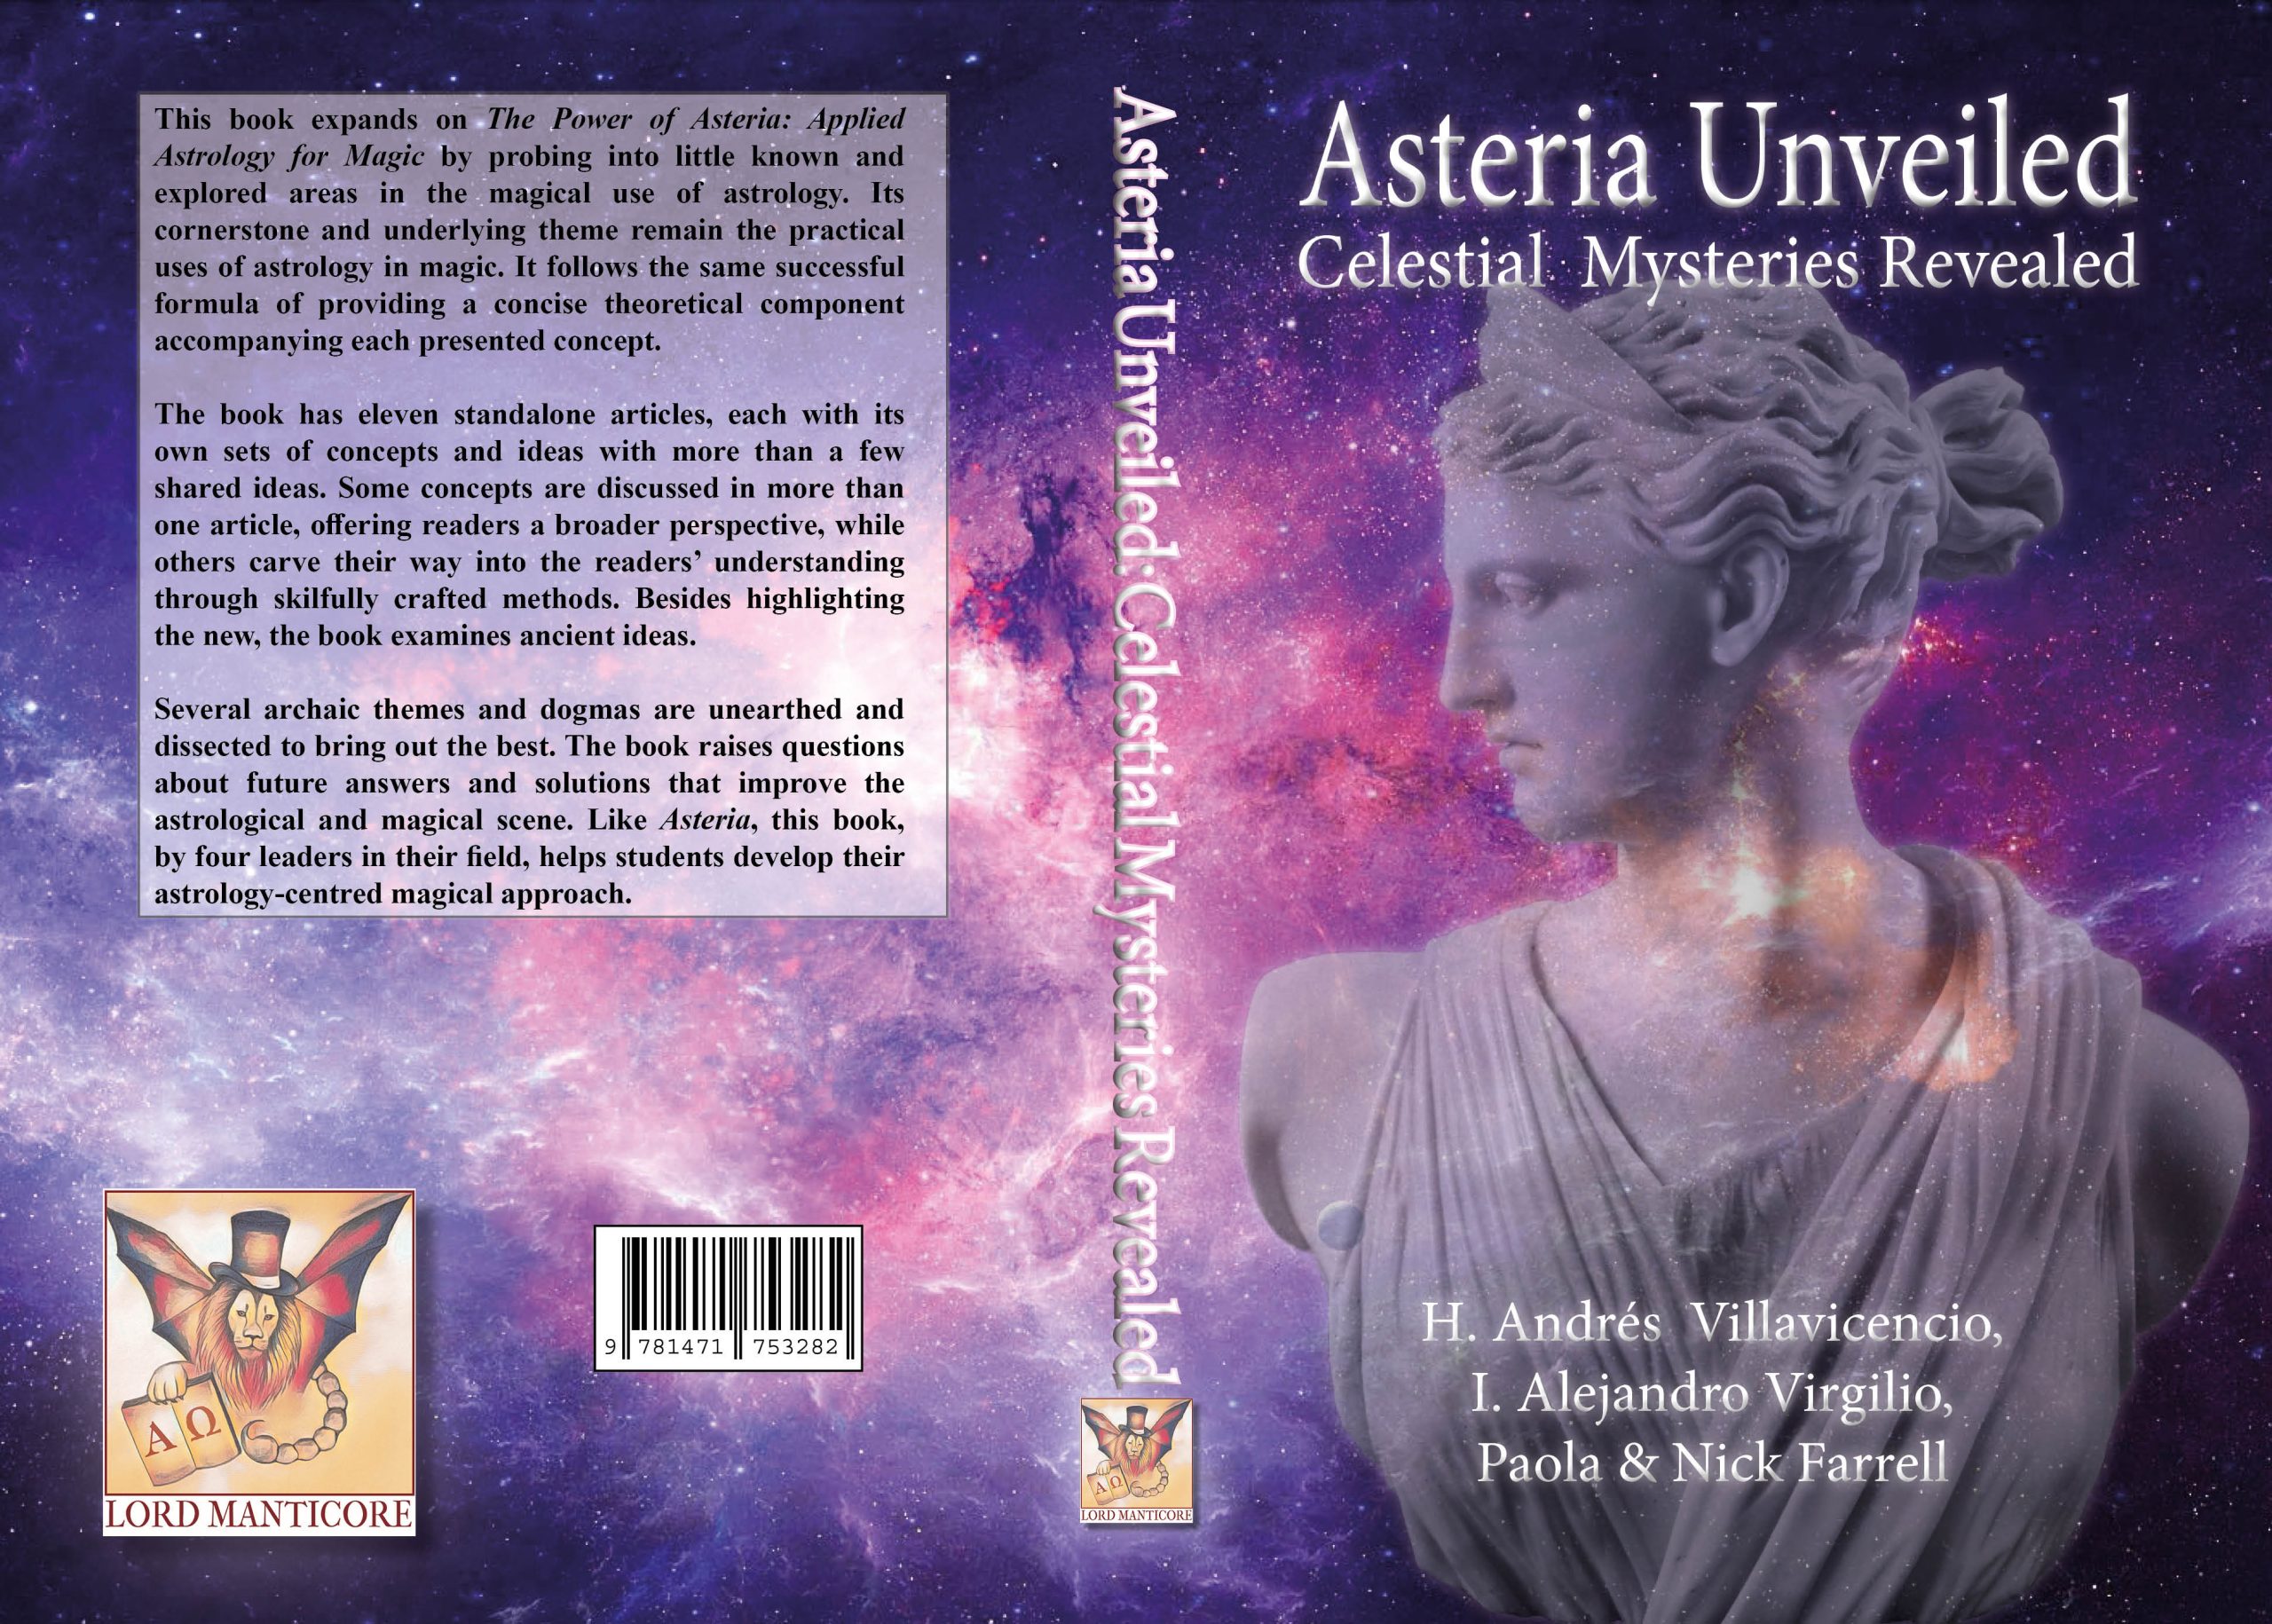 Asteria Unveiled: Celestial Mysteries Revealed is now out